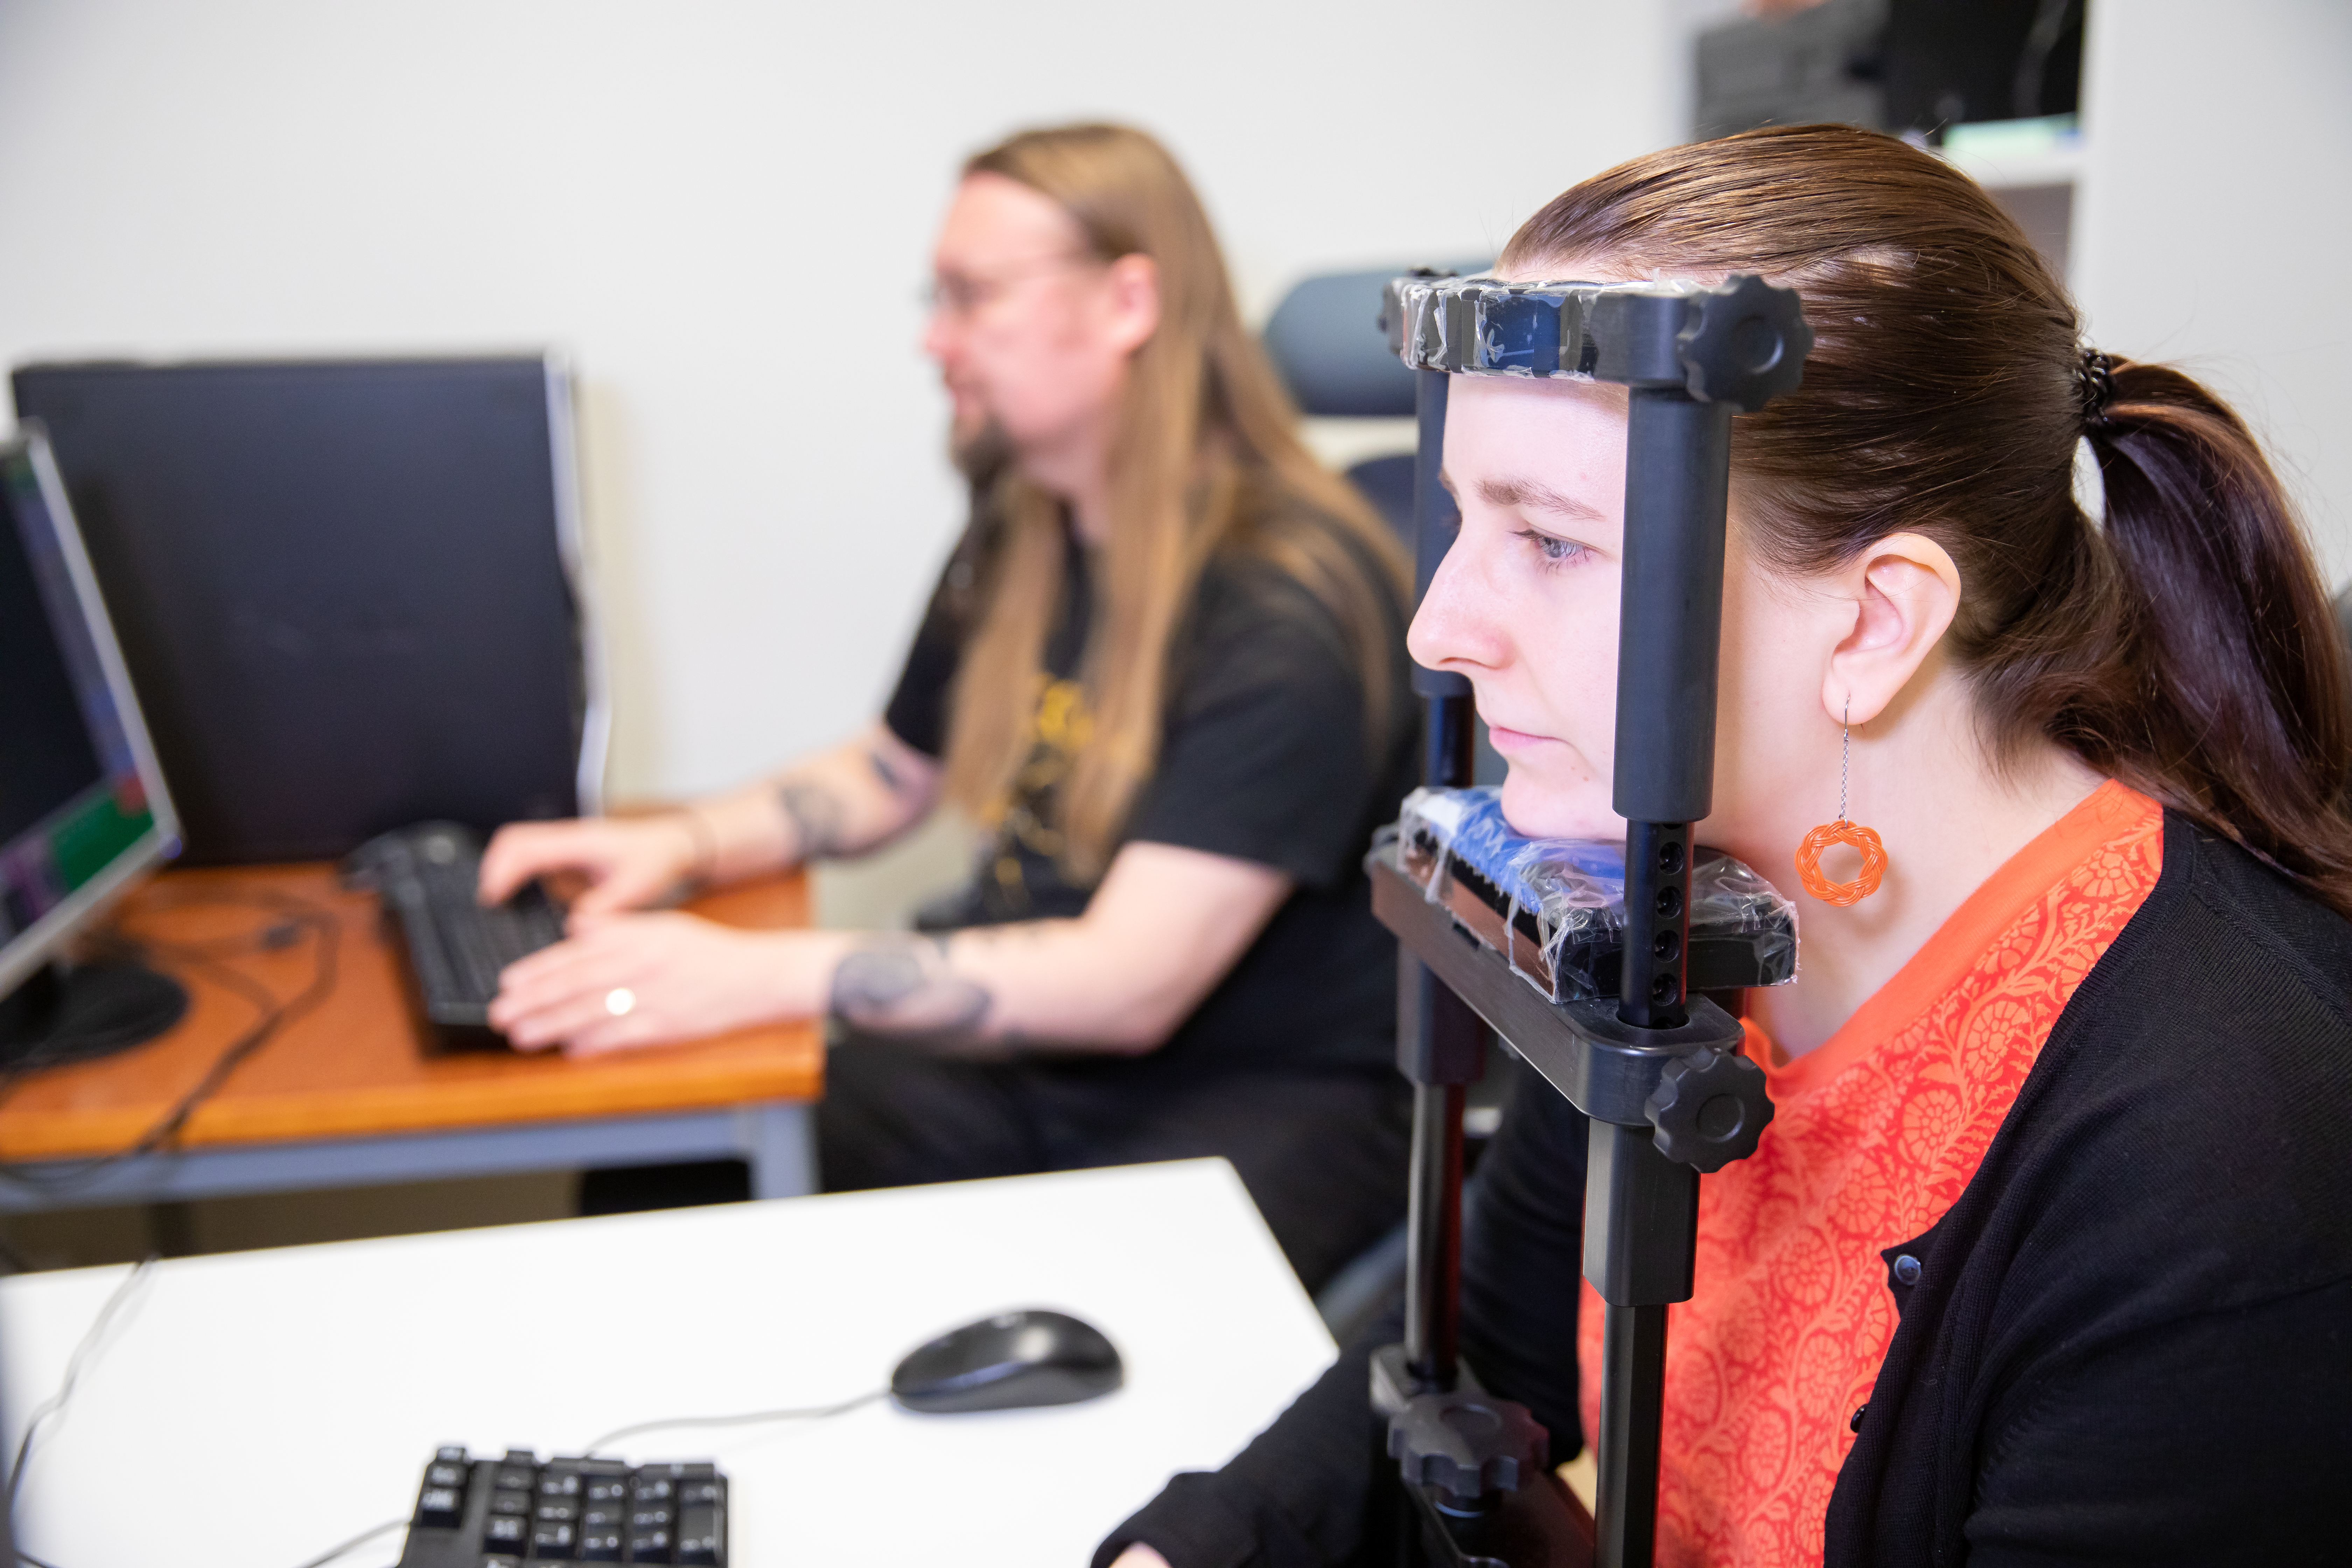 A participant in front of an eye tracker, researcher at the back.